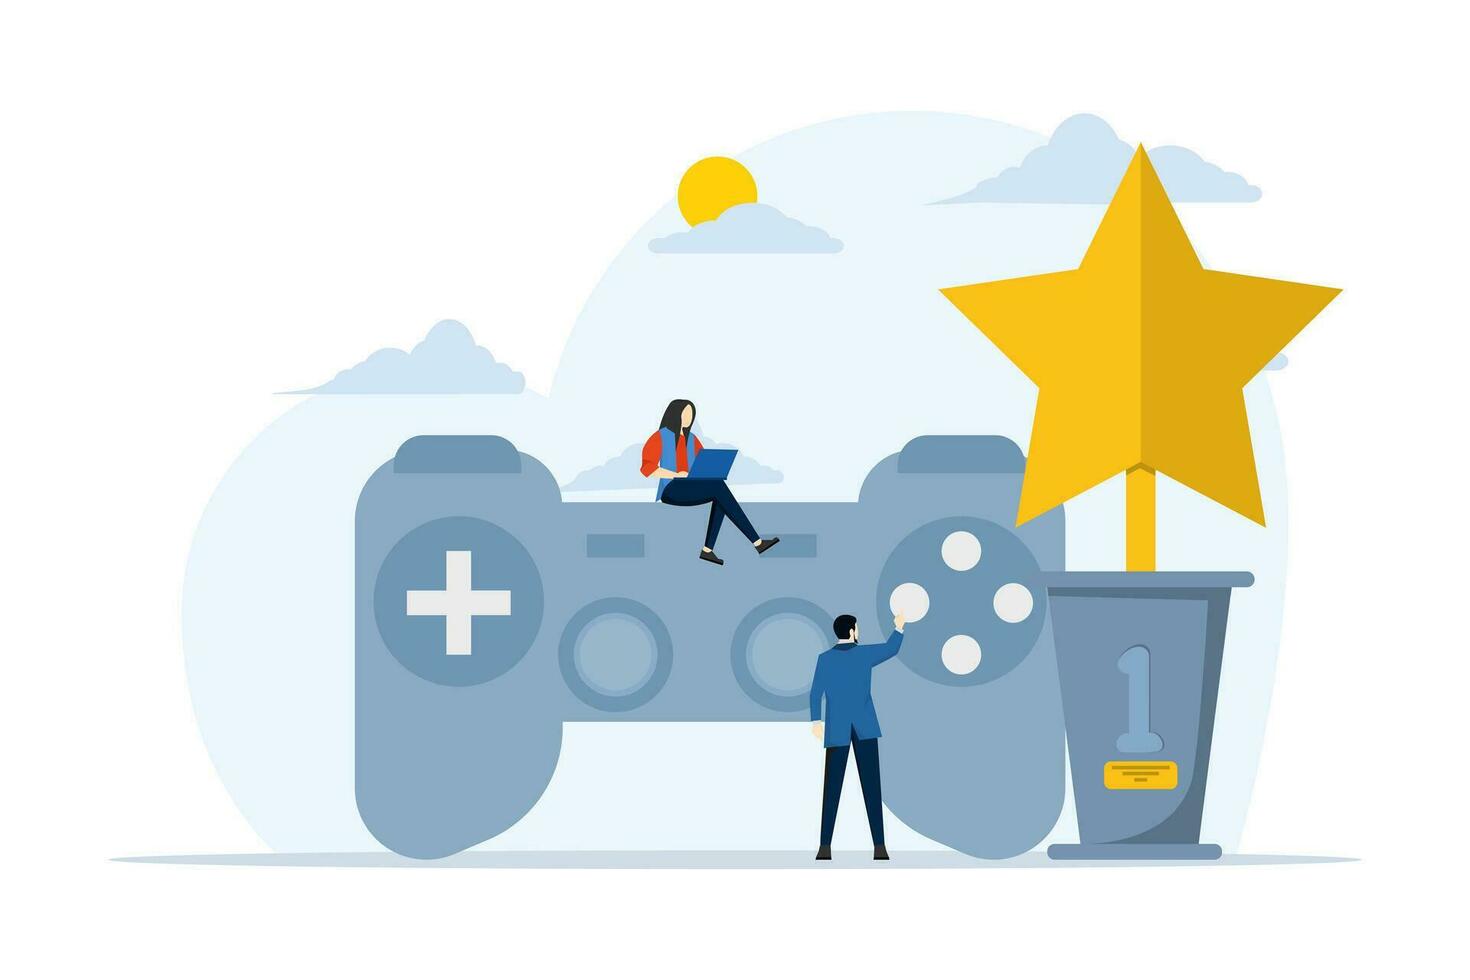 Play games with gadgets, gamers, video games, e-sports. Playing online games, people playing online games on PC, people playing mobile games. professional gamer, Entertainment flat vector illustration